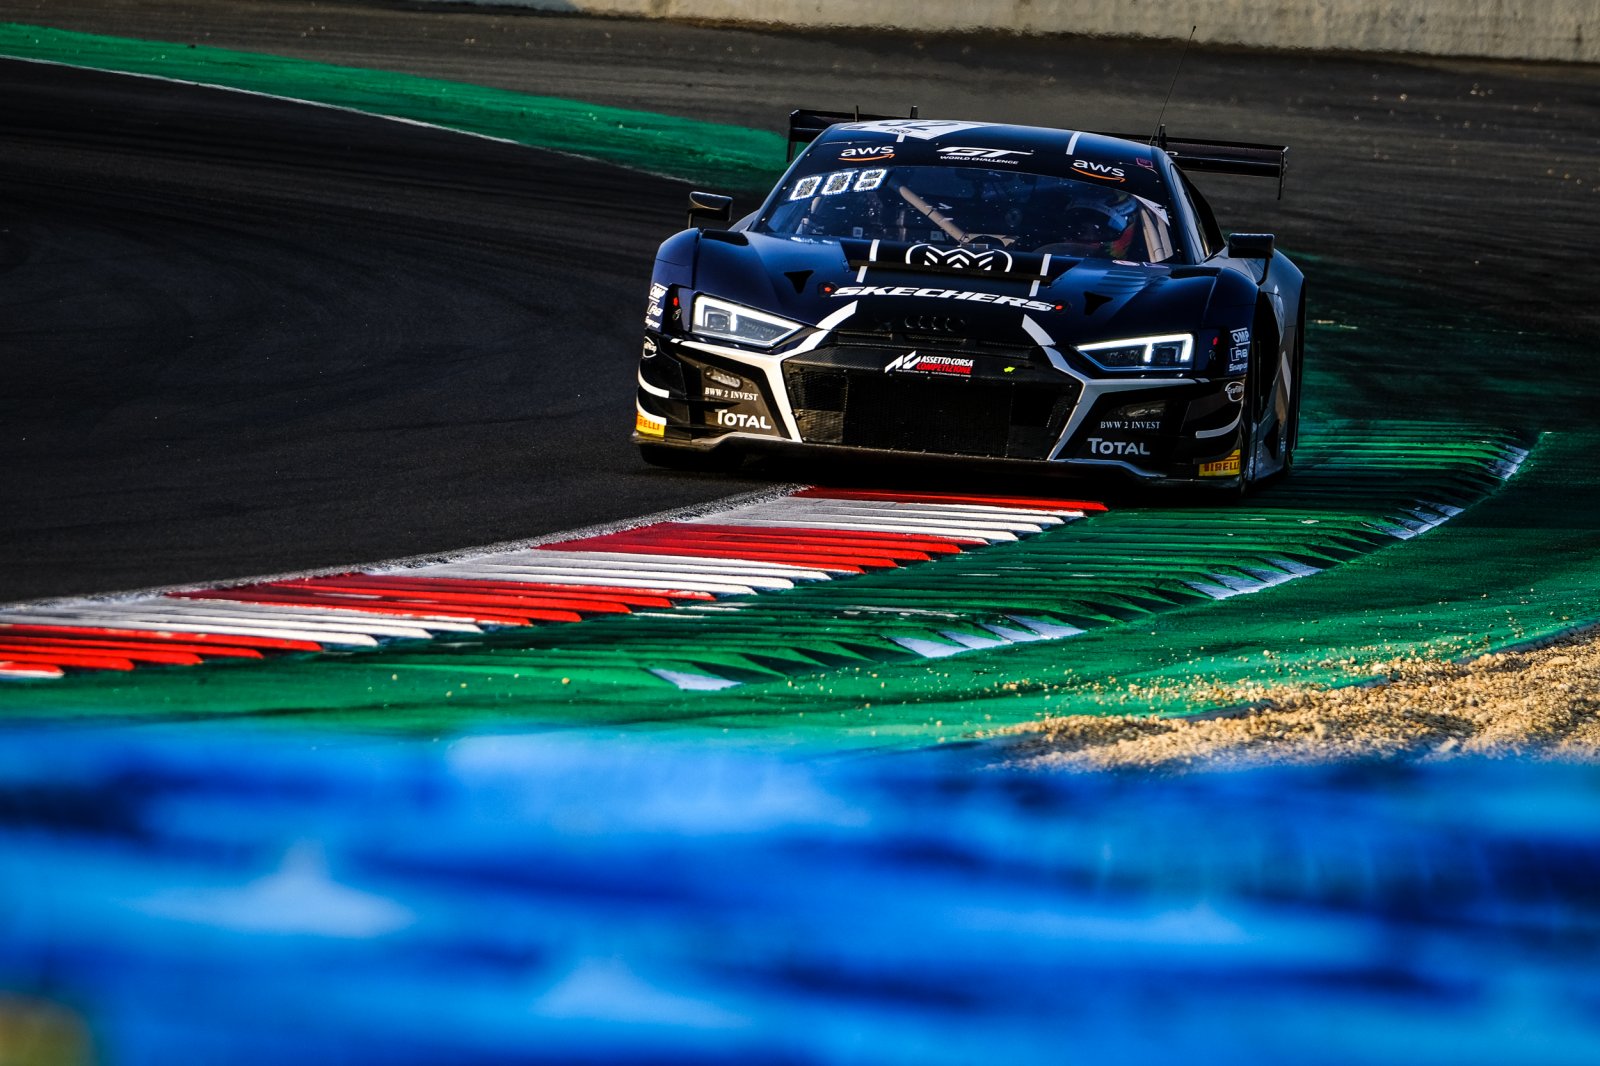 The Belgian Audi Club Team WRT with a 4-car entry in the GT World Challenge Europe Powered by AWS at Zandvoort